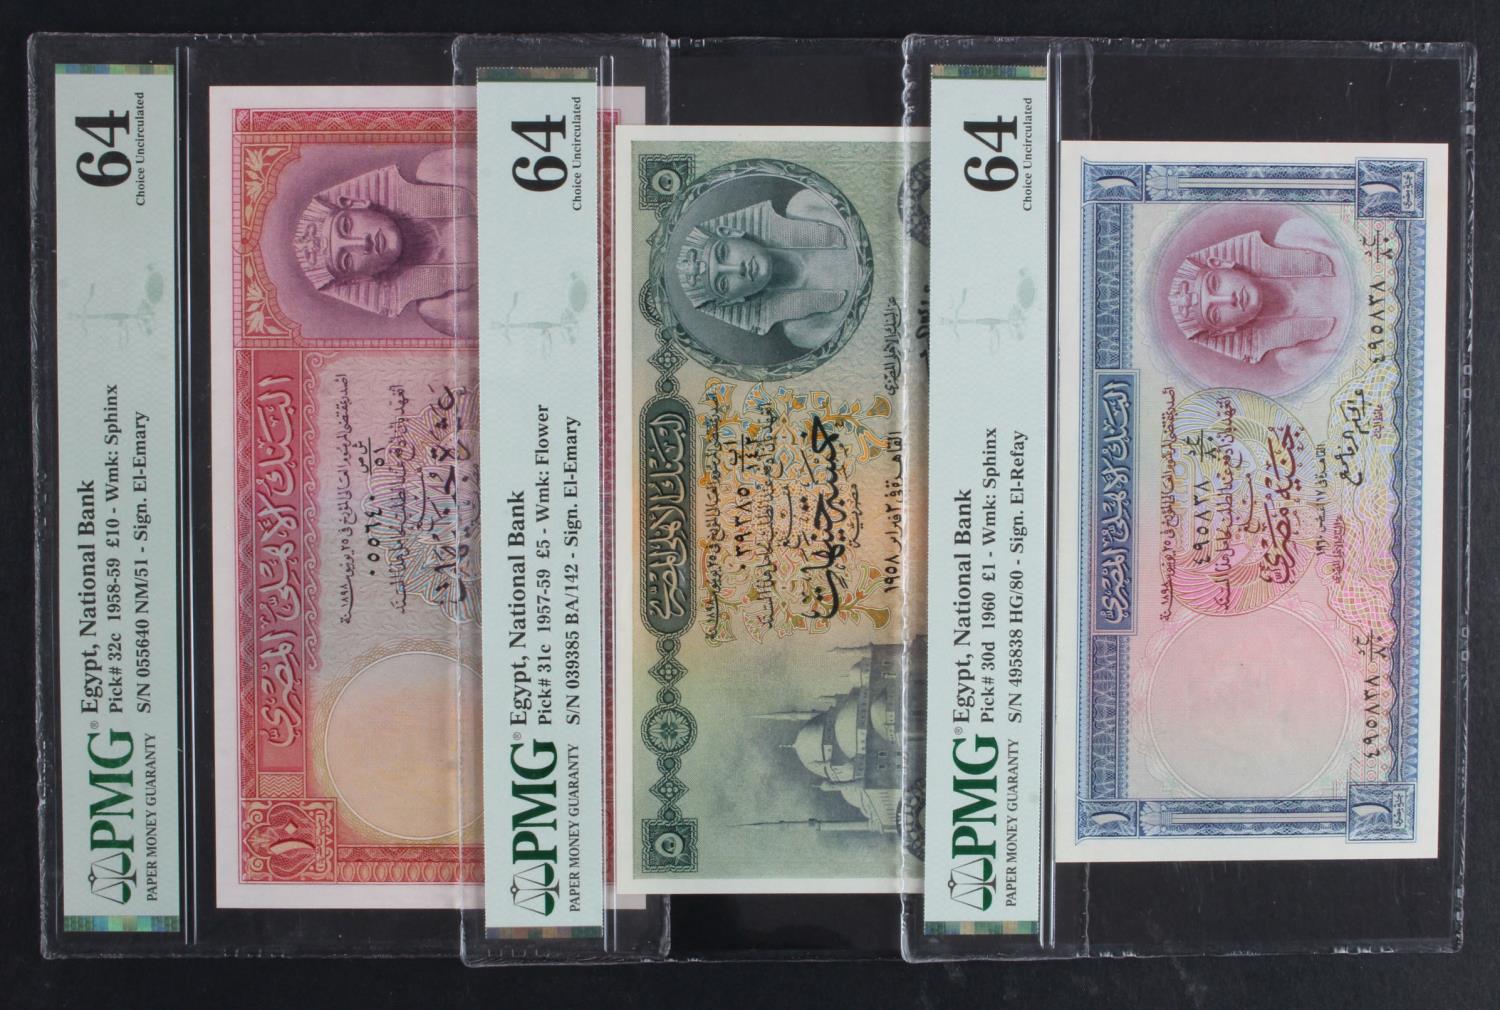 Egypt (3), 10 Pounds dated 1958 signed Abdel Gueleel El-Emary, serial 055640 NM/51 (BNB B132c,